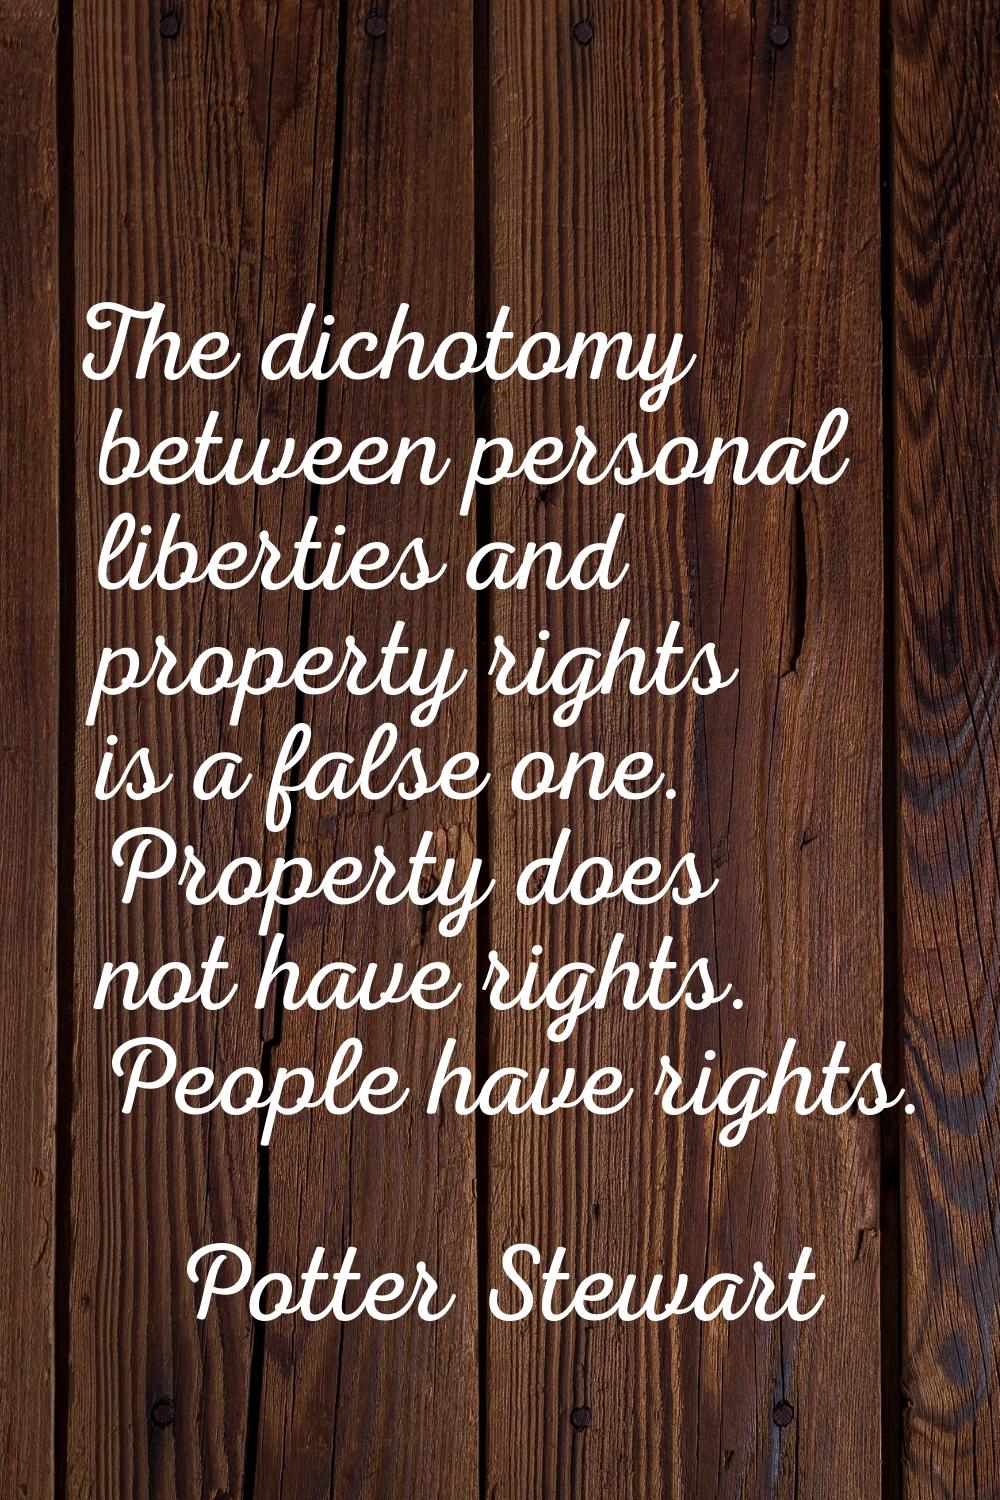 The dichotomy between personal liberties and property rights is a false one. Property does not have